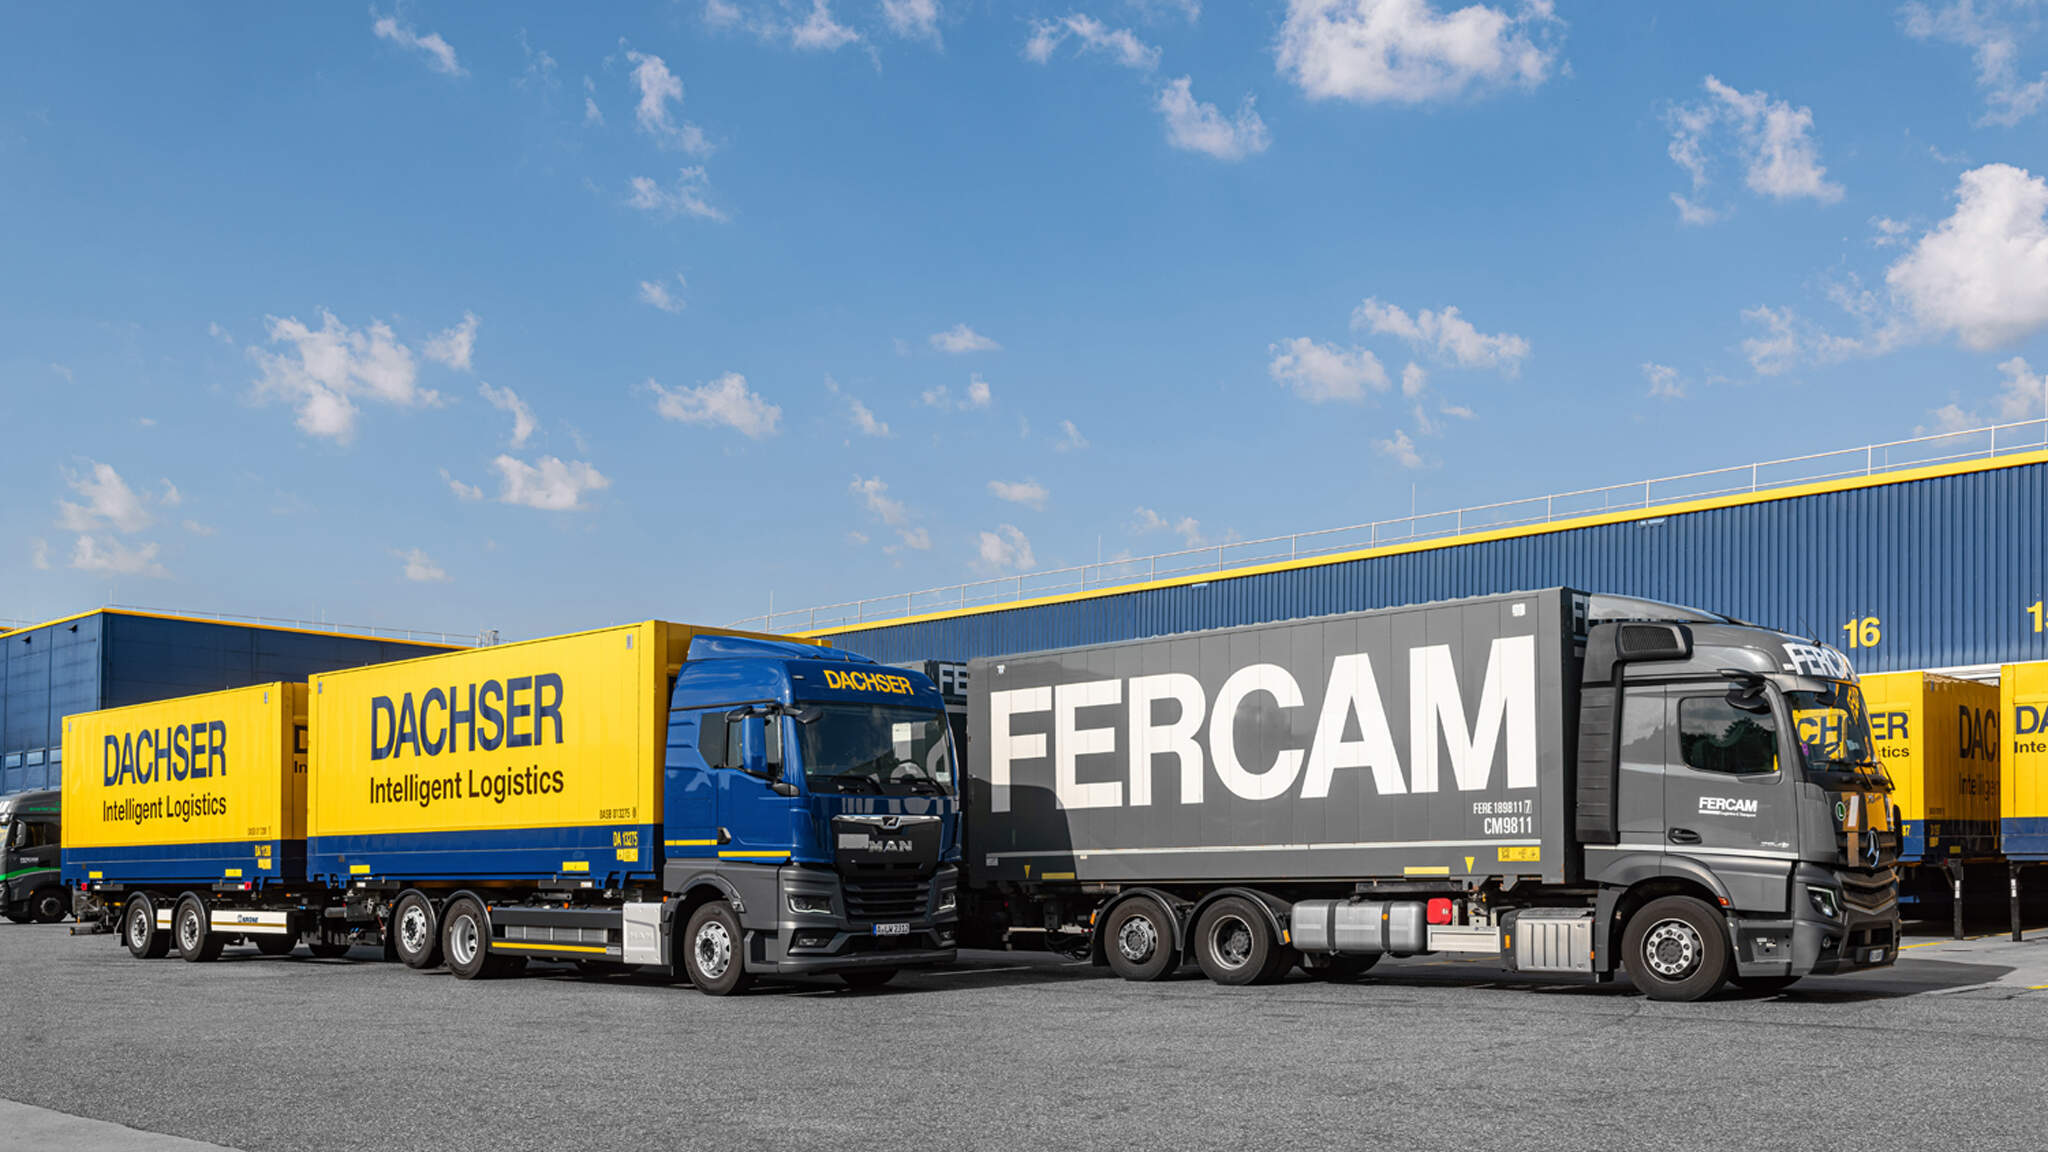 Thanks to their long-standing partnership, DACHSER and FERCAM are already fully in sync when it comes to operational groupage handling.